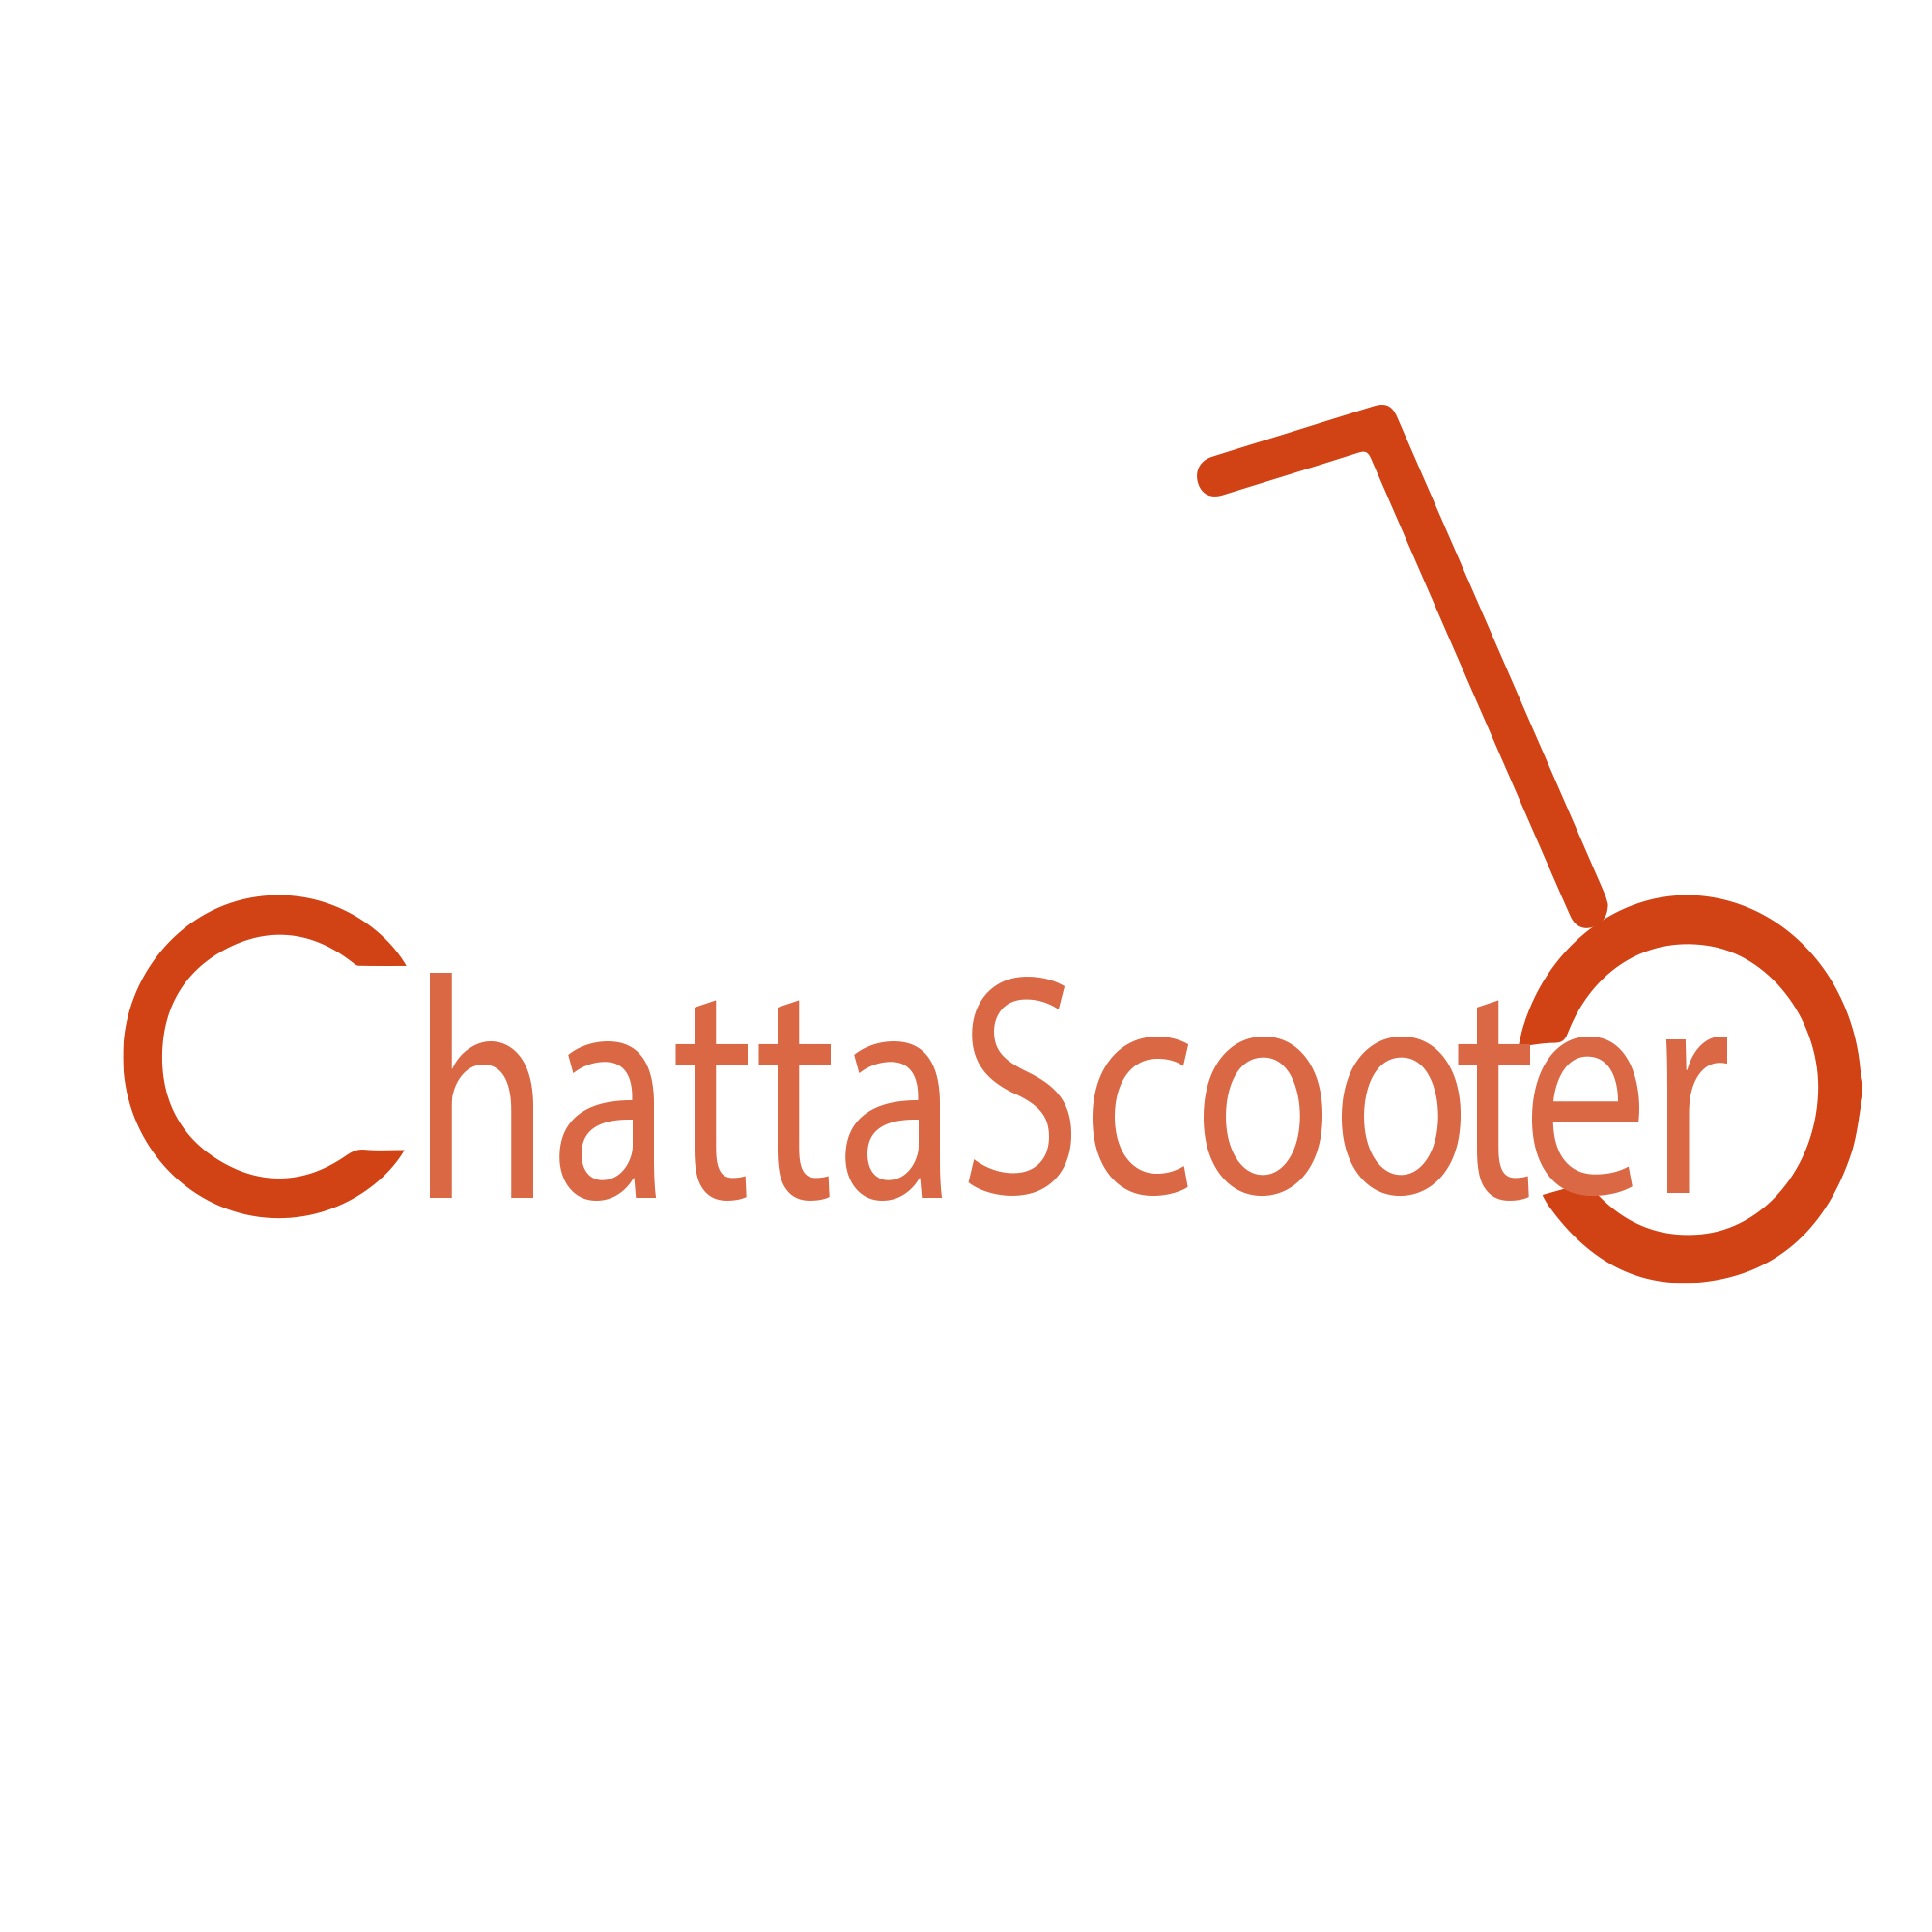 ChattaScooter Logo